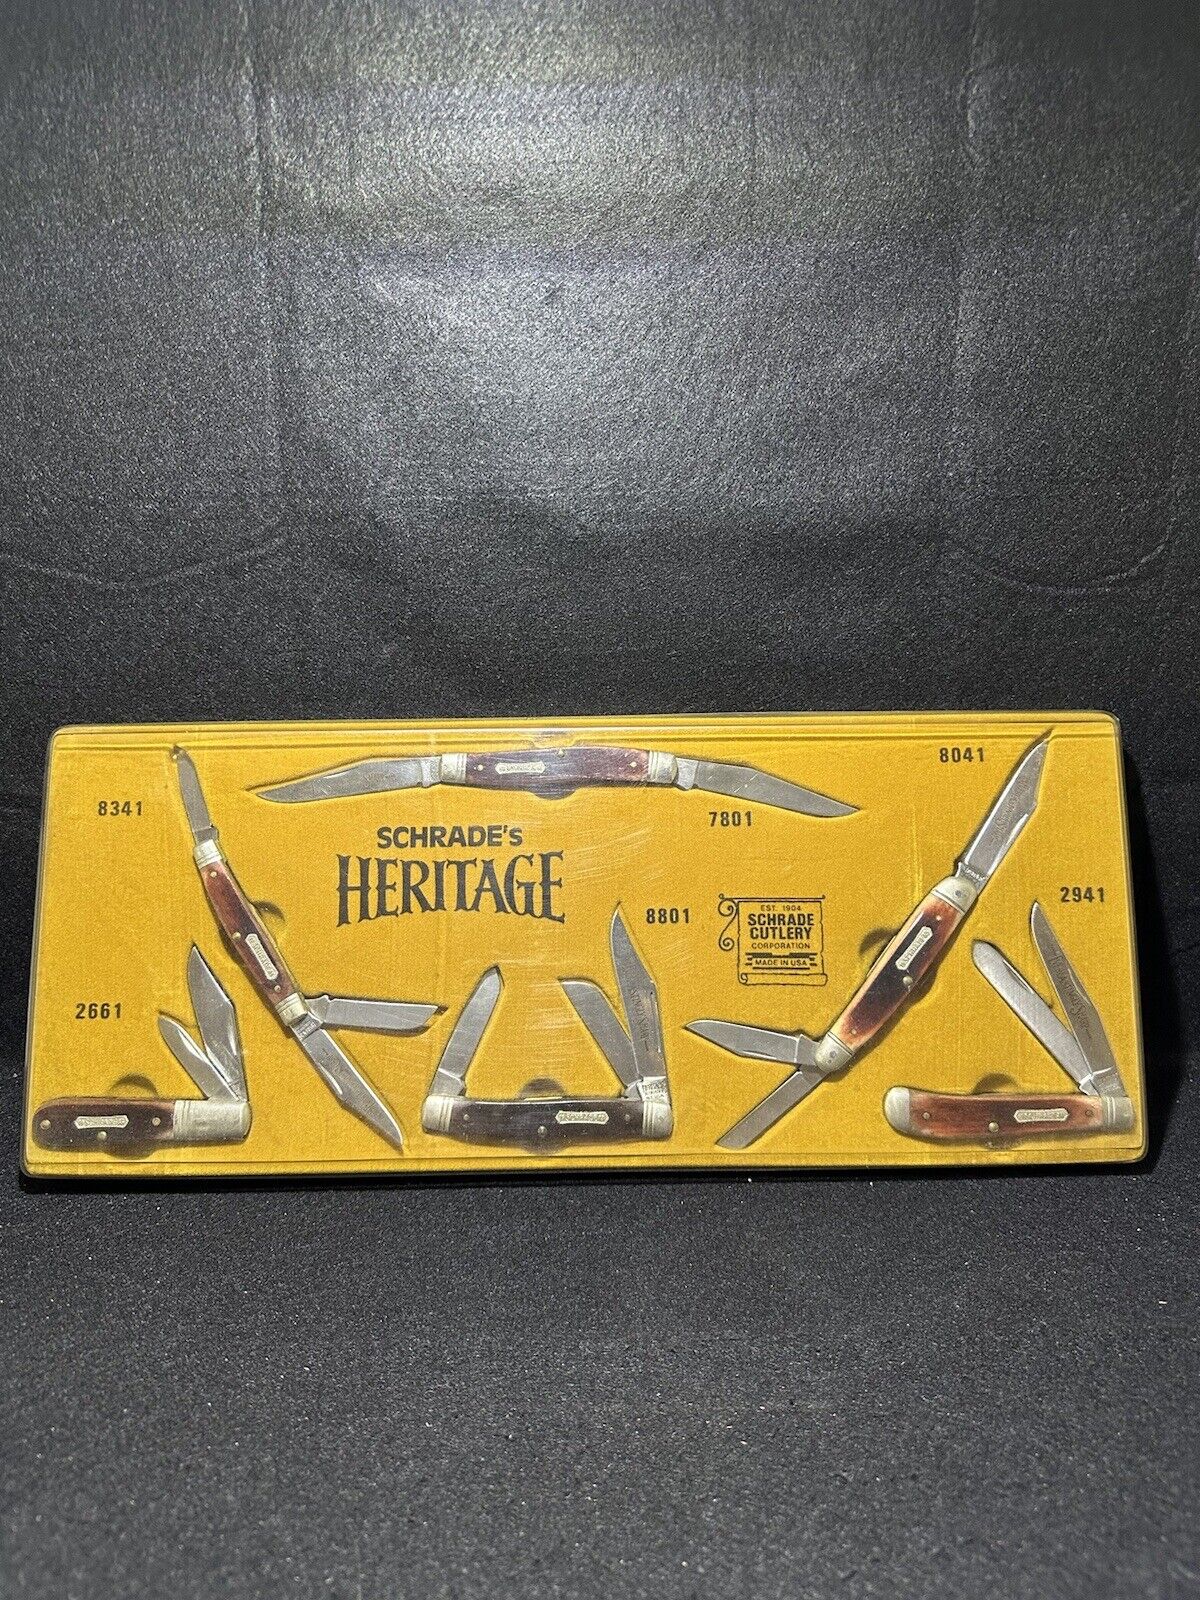 Vintage Rare USA Schrade Heritage Knife Set With 6 Different Knives 1977-1982